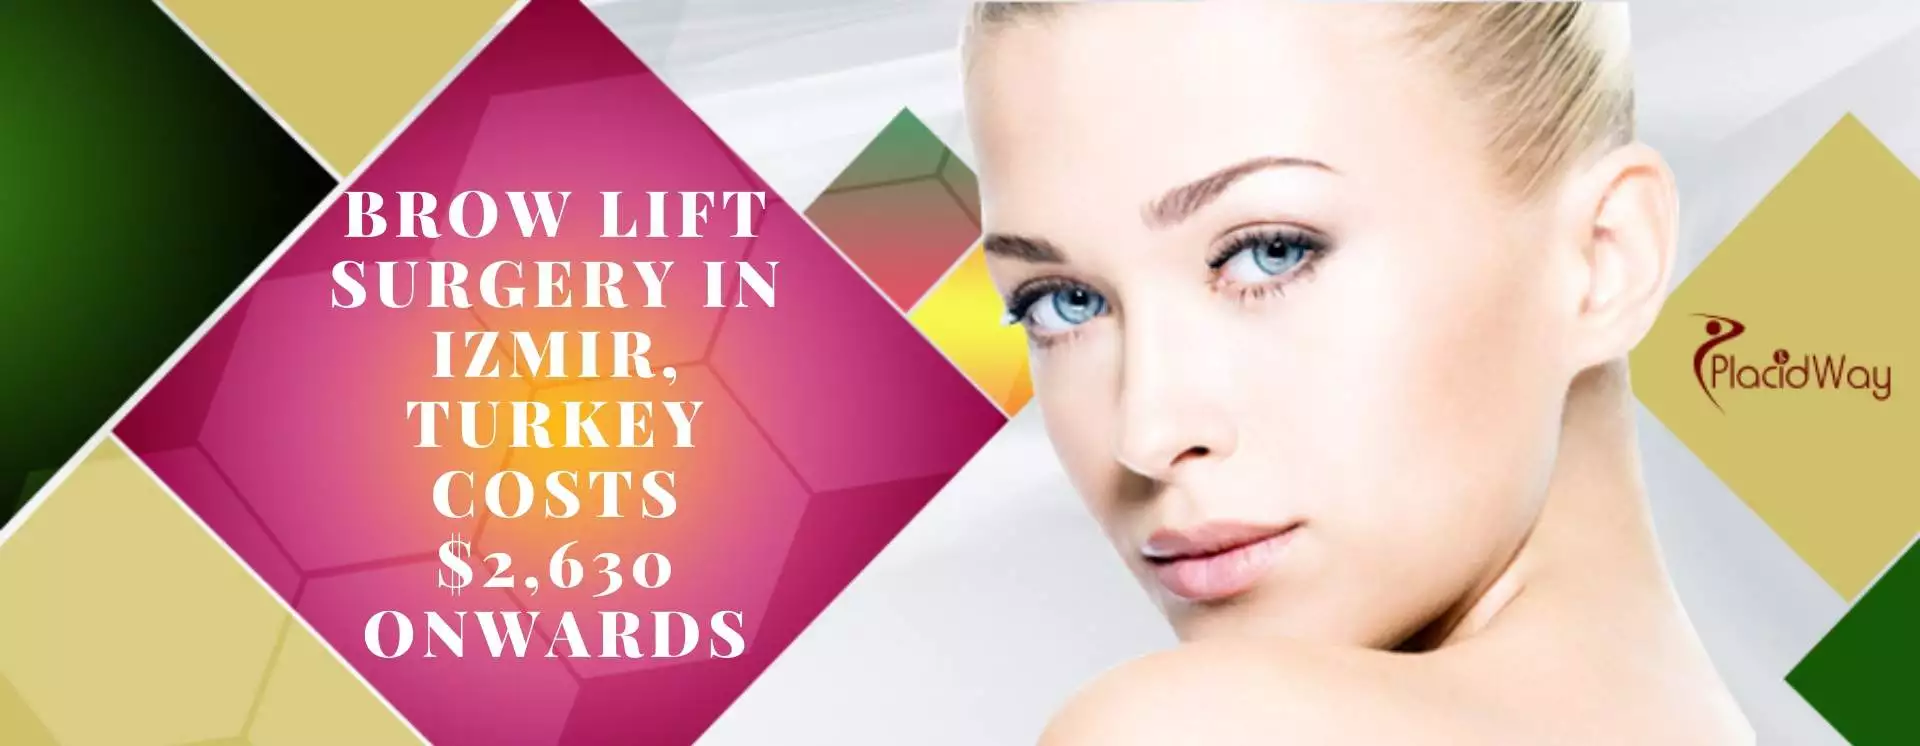 Latest Brow Lift Surgery Package In Izmir Turkey